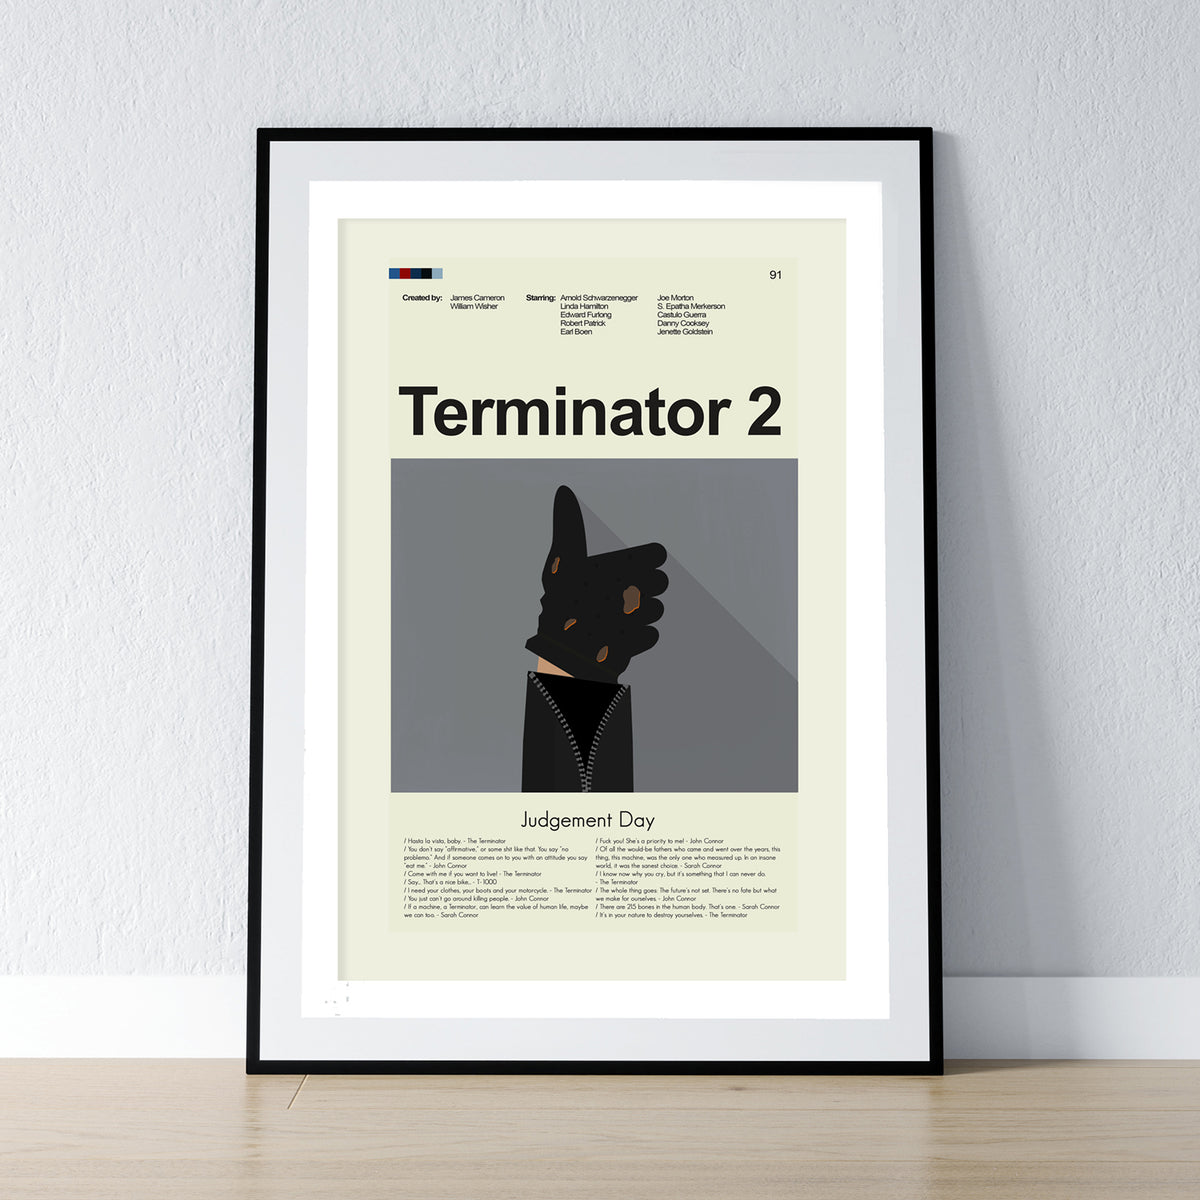 Terminator 2: Judgement Day - Final Scene  | 12"x18" or 18"x24" Print only